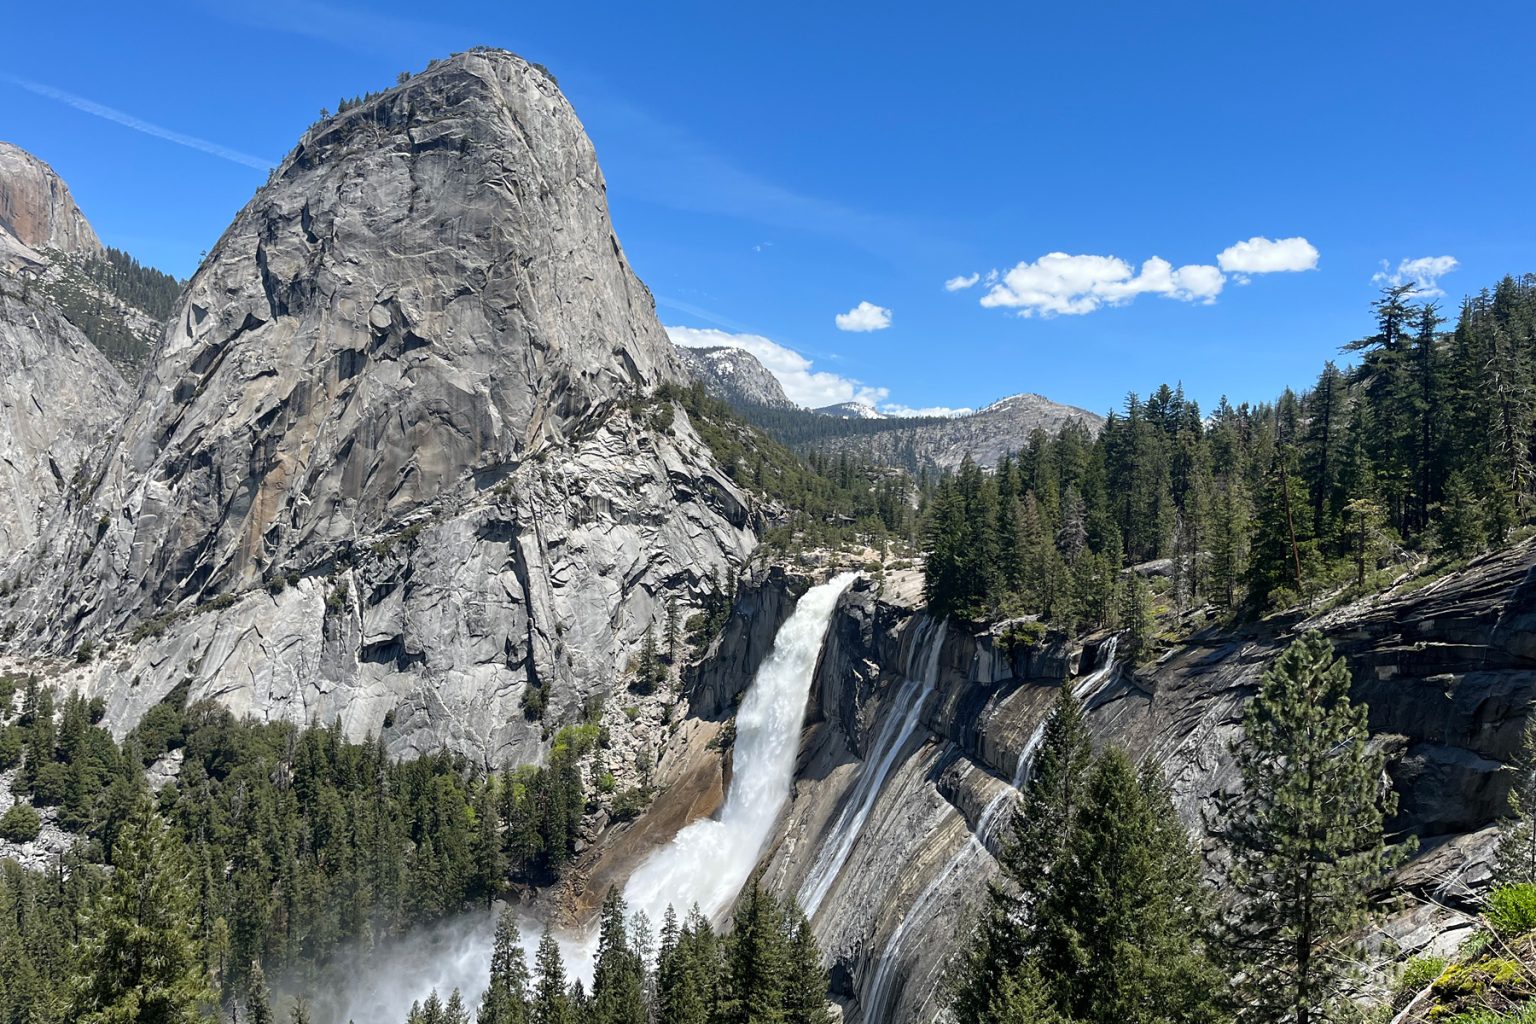 Nevada Falls viewpoint along a stretch of the John Muir Trail in Yosemite